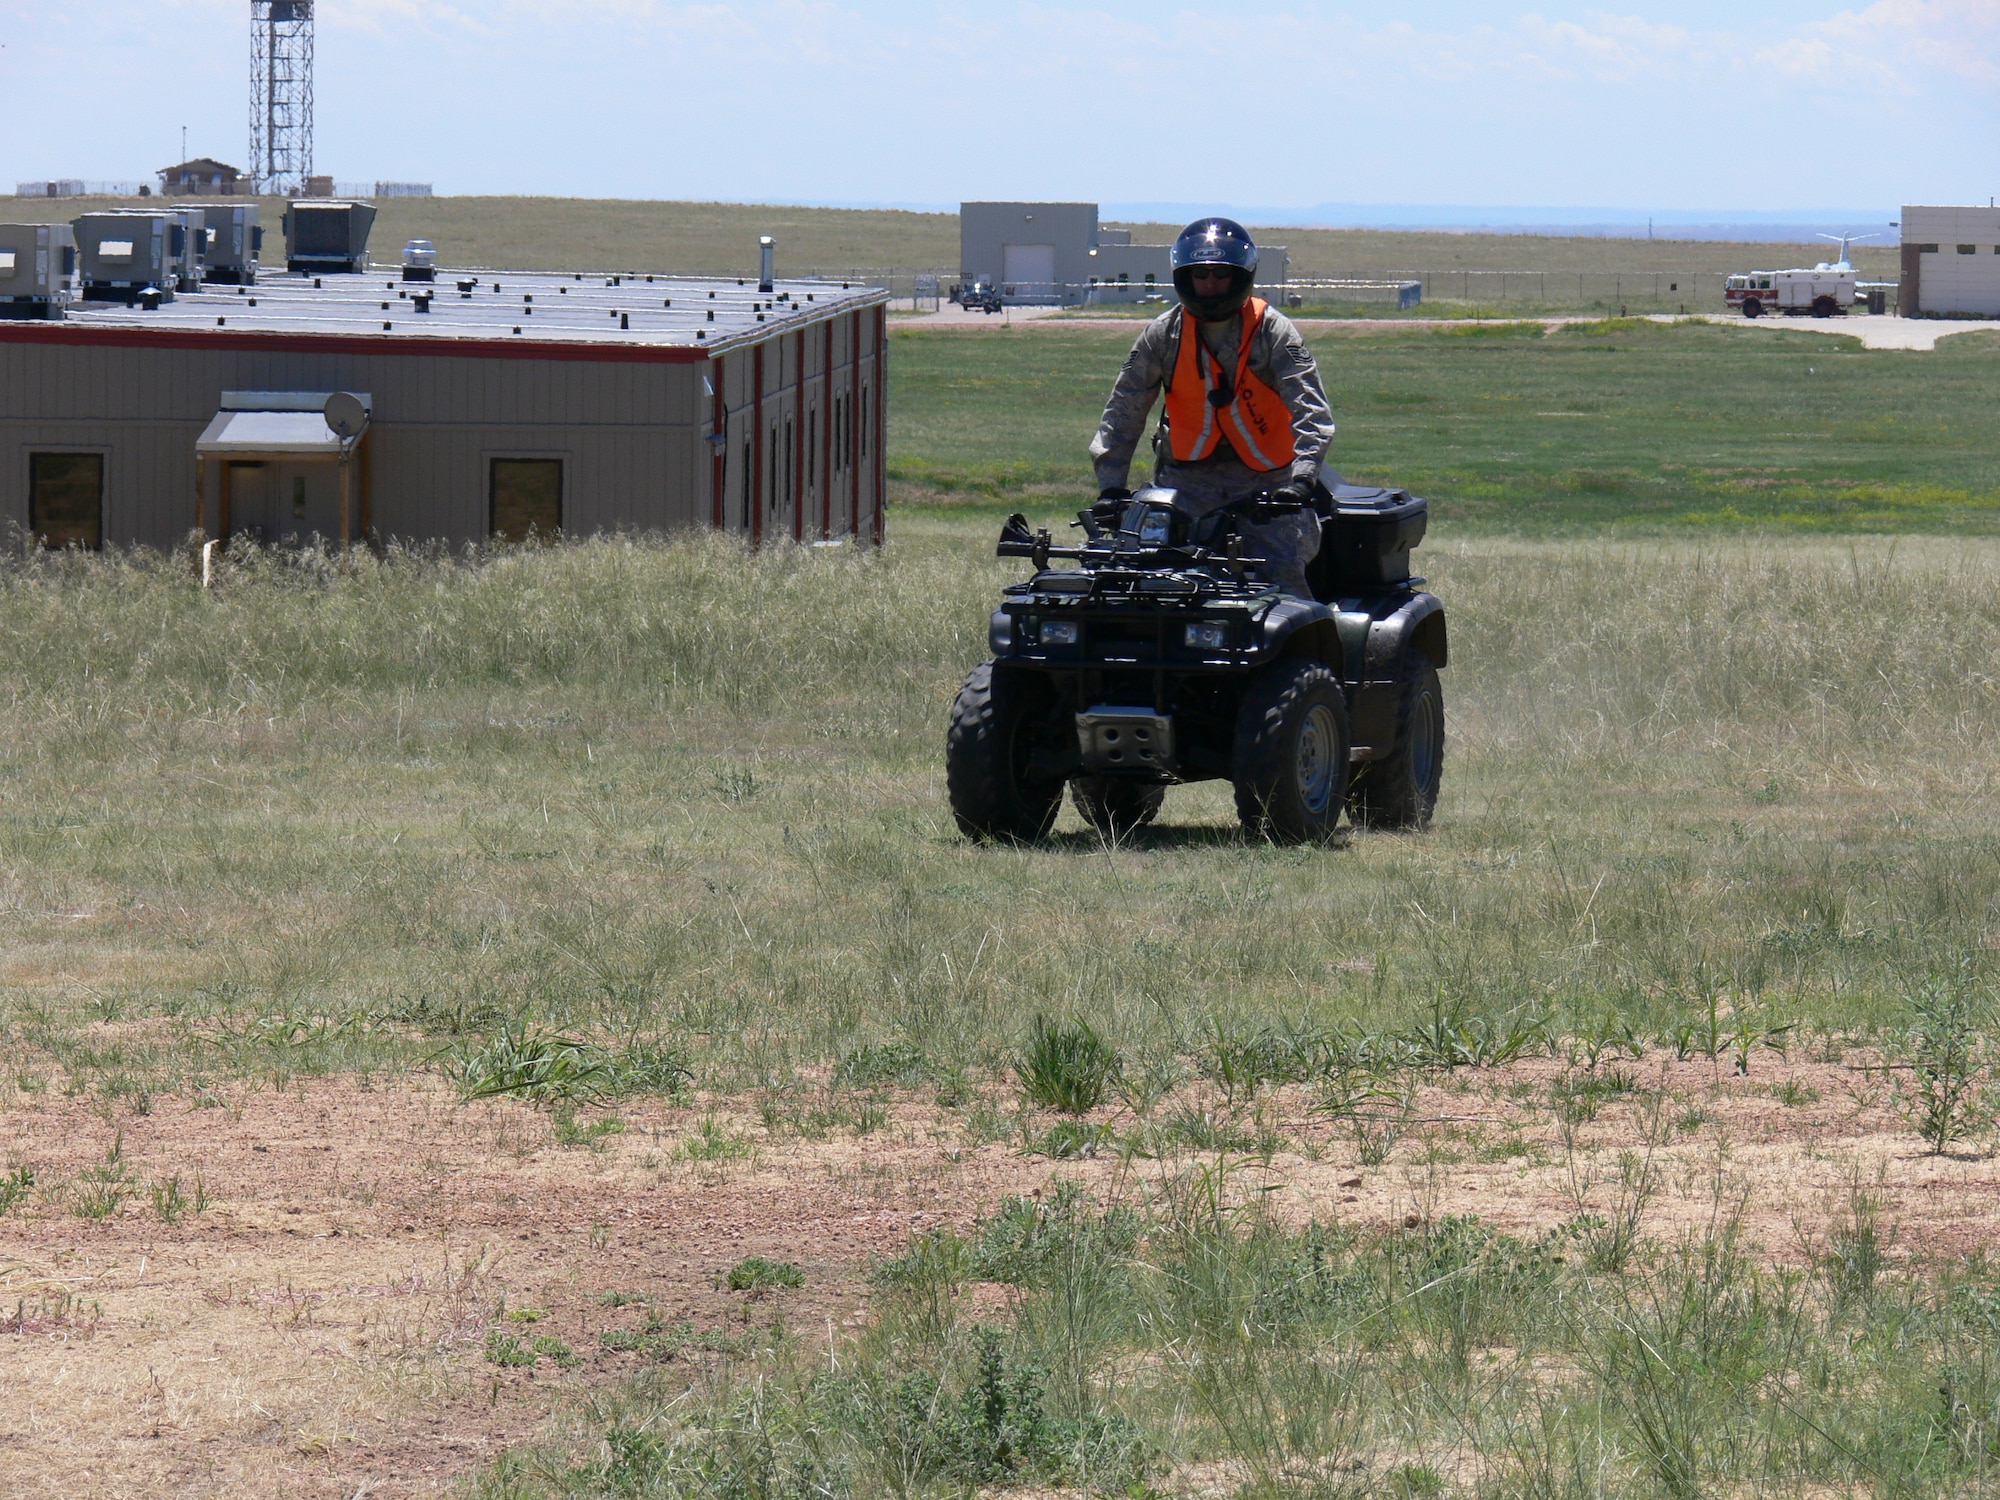 Staff Sgt. Steven Howell, 21st Security Forces Squadron, patrols on an all-terrain vehicle near the Peterson Air Force Base flightline June 15. The ATV patrol is new and allows security forces to get into areas where a squad car cannot go. It’s part of the new integrated defense plan designed by the 21st SFS. The squadron is the first in Air Force Space Command to have a published integrated defense plan under the new Air Force Instruction. (U.S. Air Force photo/Monica Mendoza)